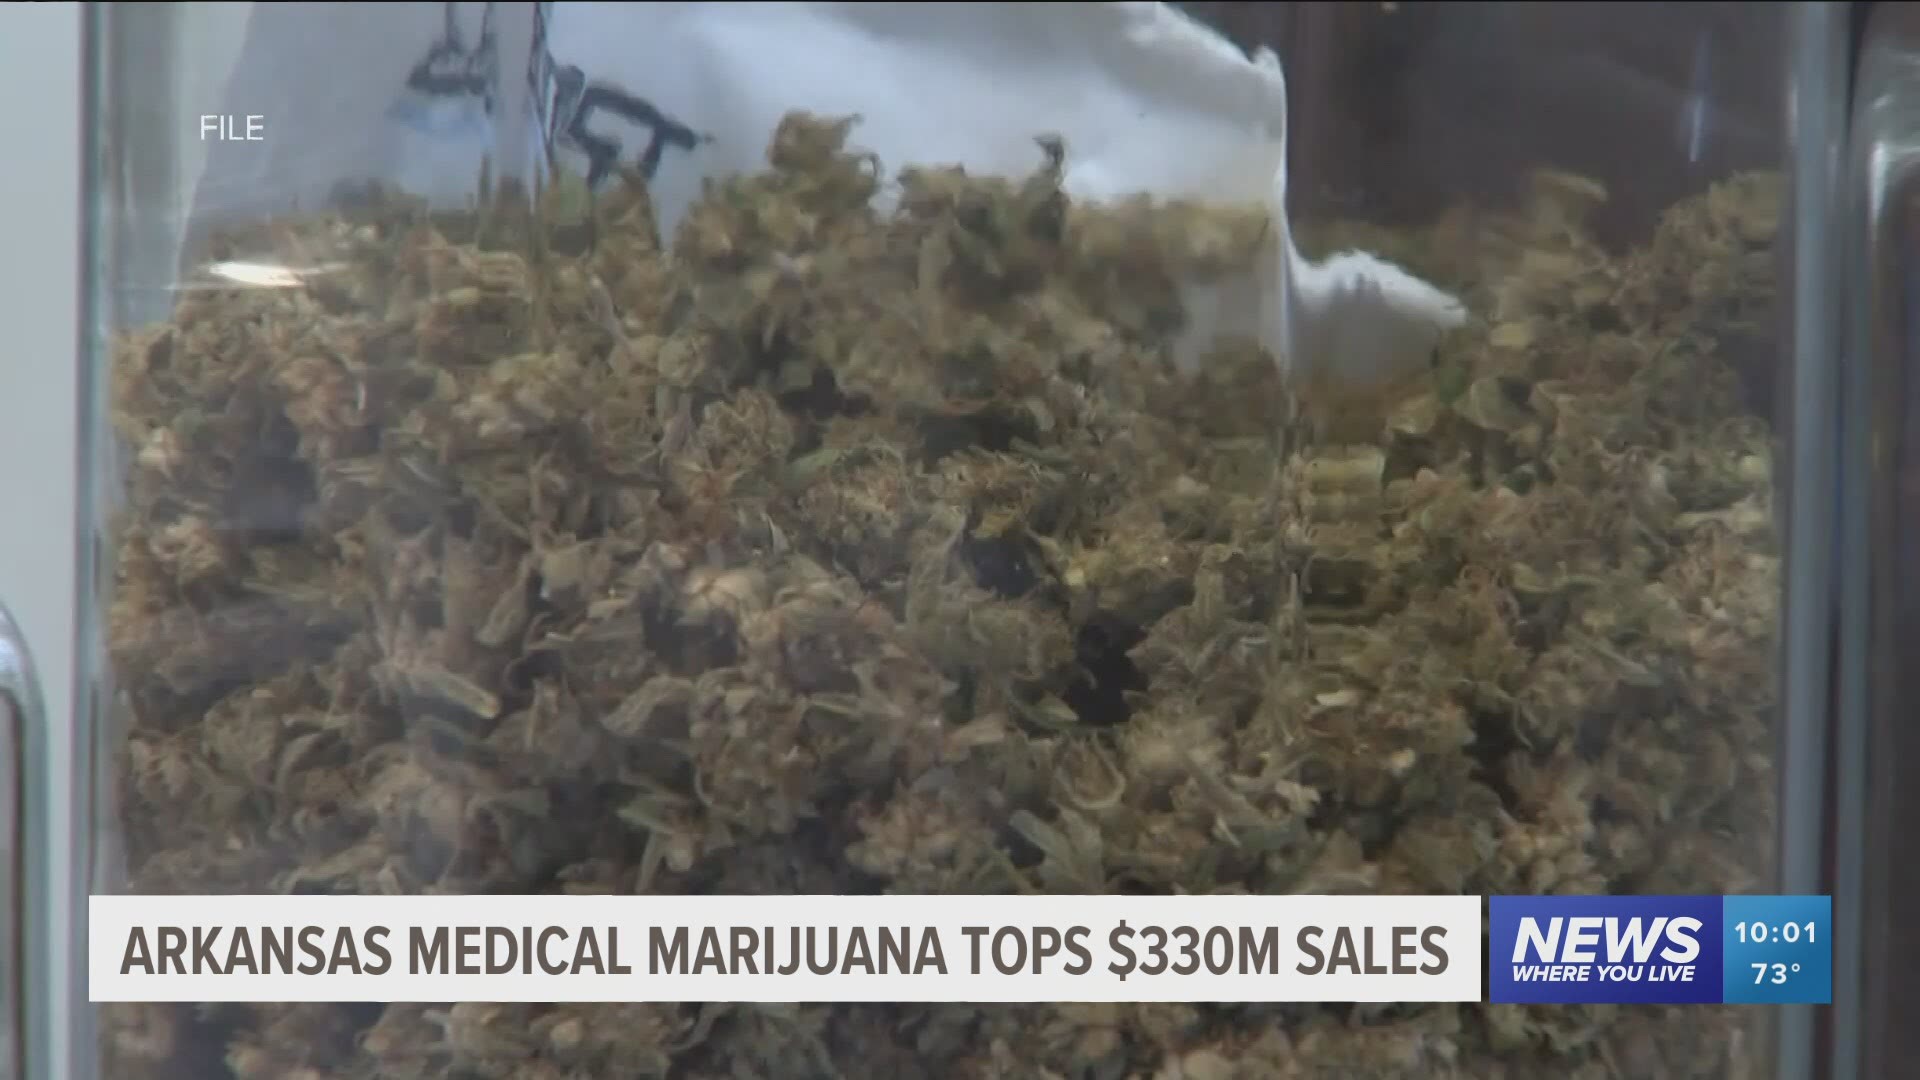 It's been nearly two years since the first medical marijuana dispensary opened in Arkansas. Sales recently topped $330 million.